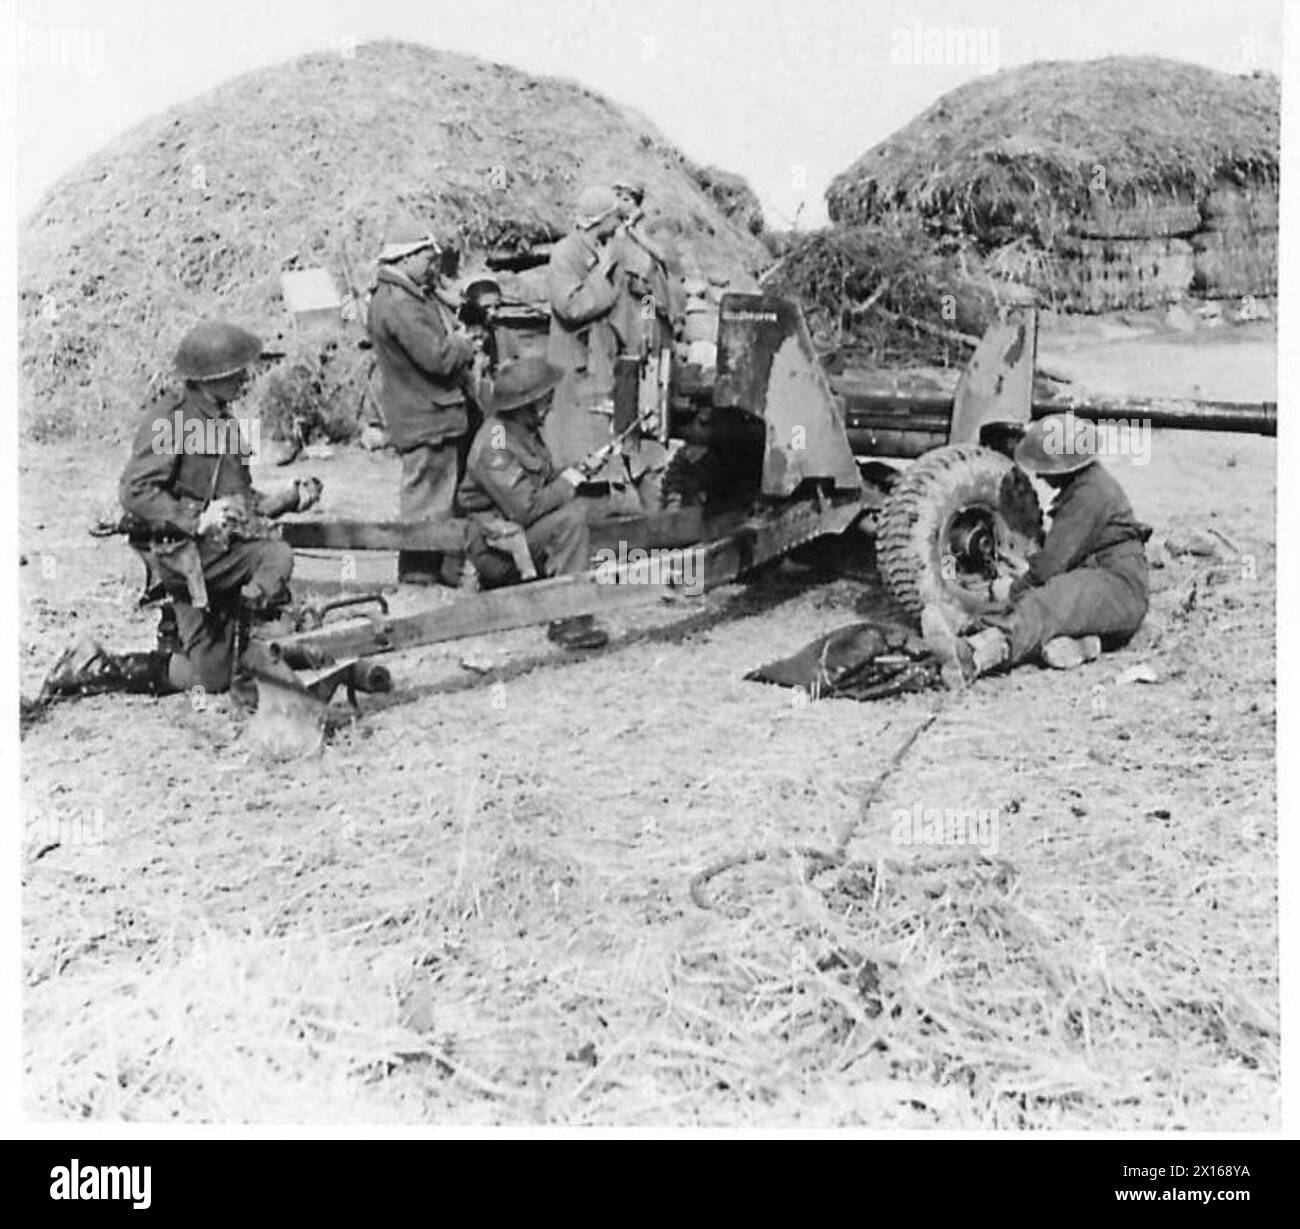 THE BRITISH ARMY IN THE TUNISIA CAMPAIGN, NOVEMBER 1942-MAY 1943 - The gun crew of the 255th Battery, Royal Artillery setting up a six pounder anti-tank gun in the hills near Medjez el Bab, 31 December 1942. Note Arab spectators with their children looking at the gunners' work British Army, British Army, 1st Army, British Army, Royal Artillery Stock Photo